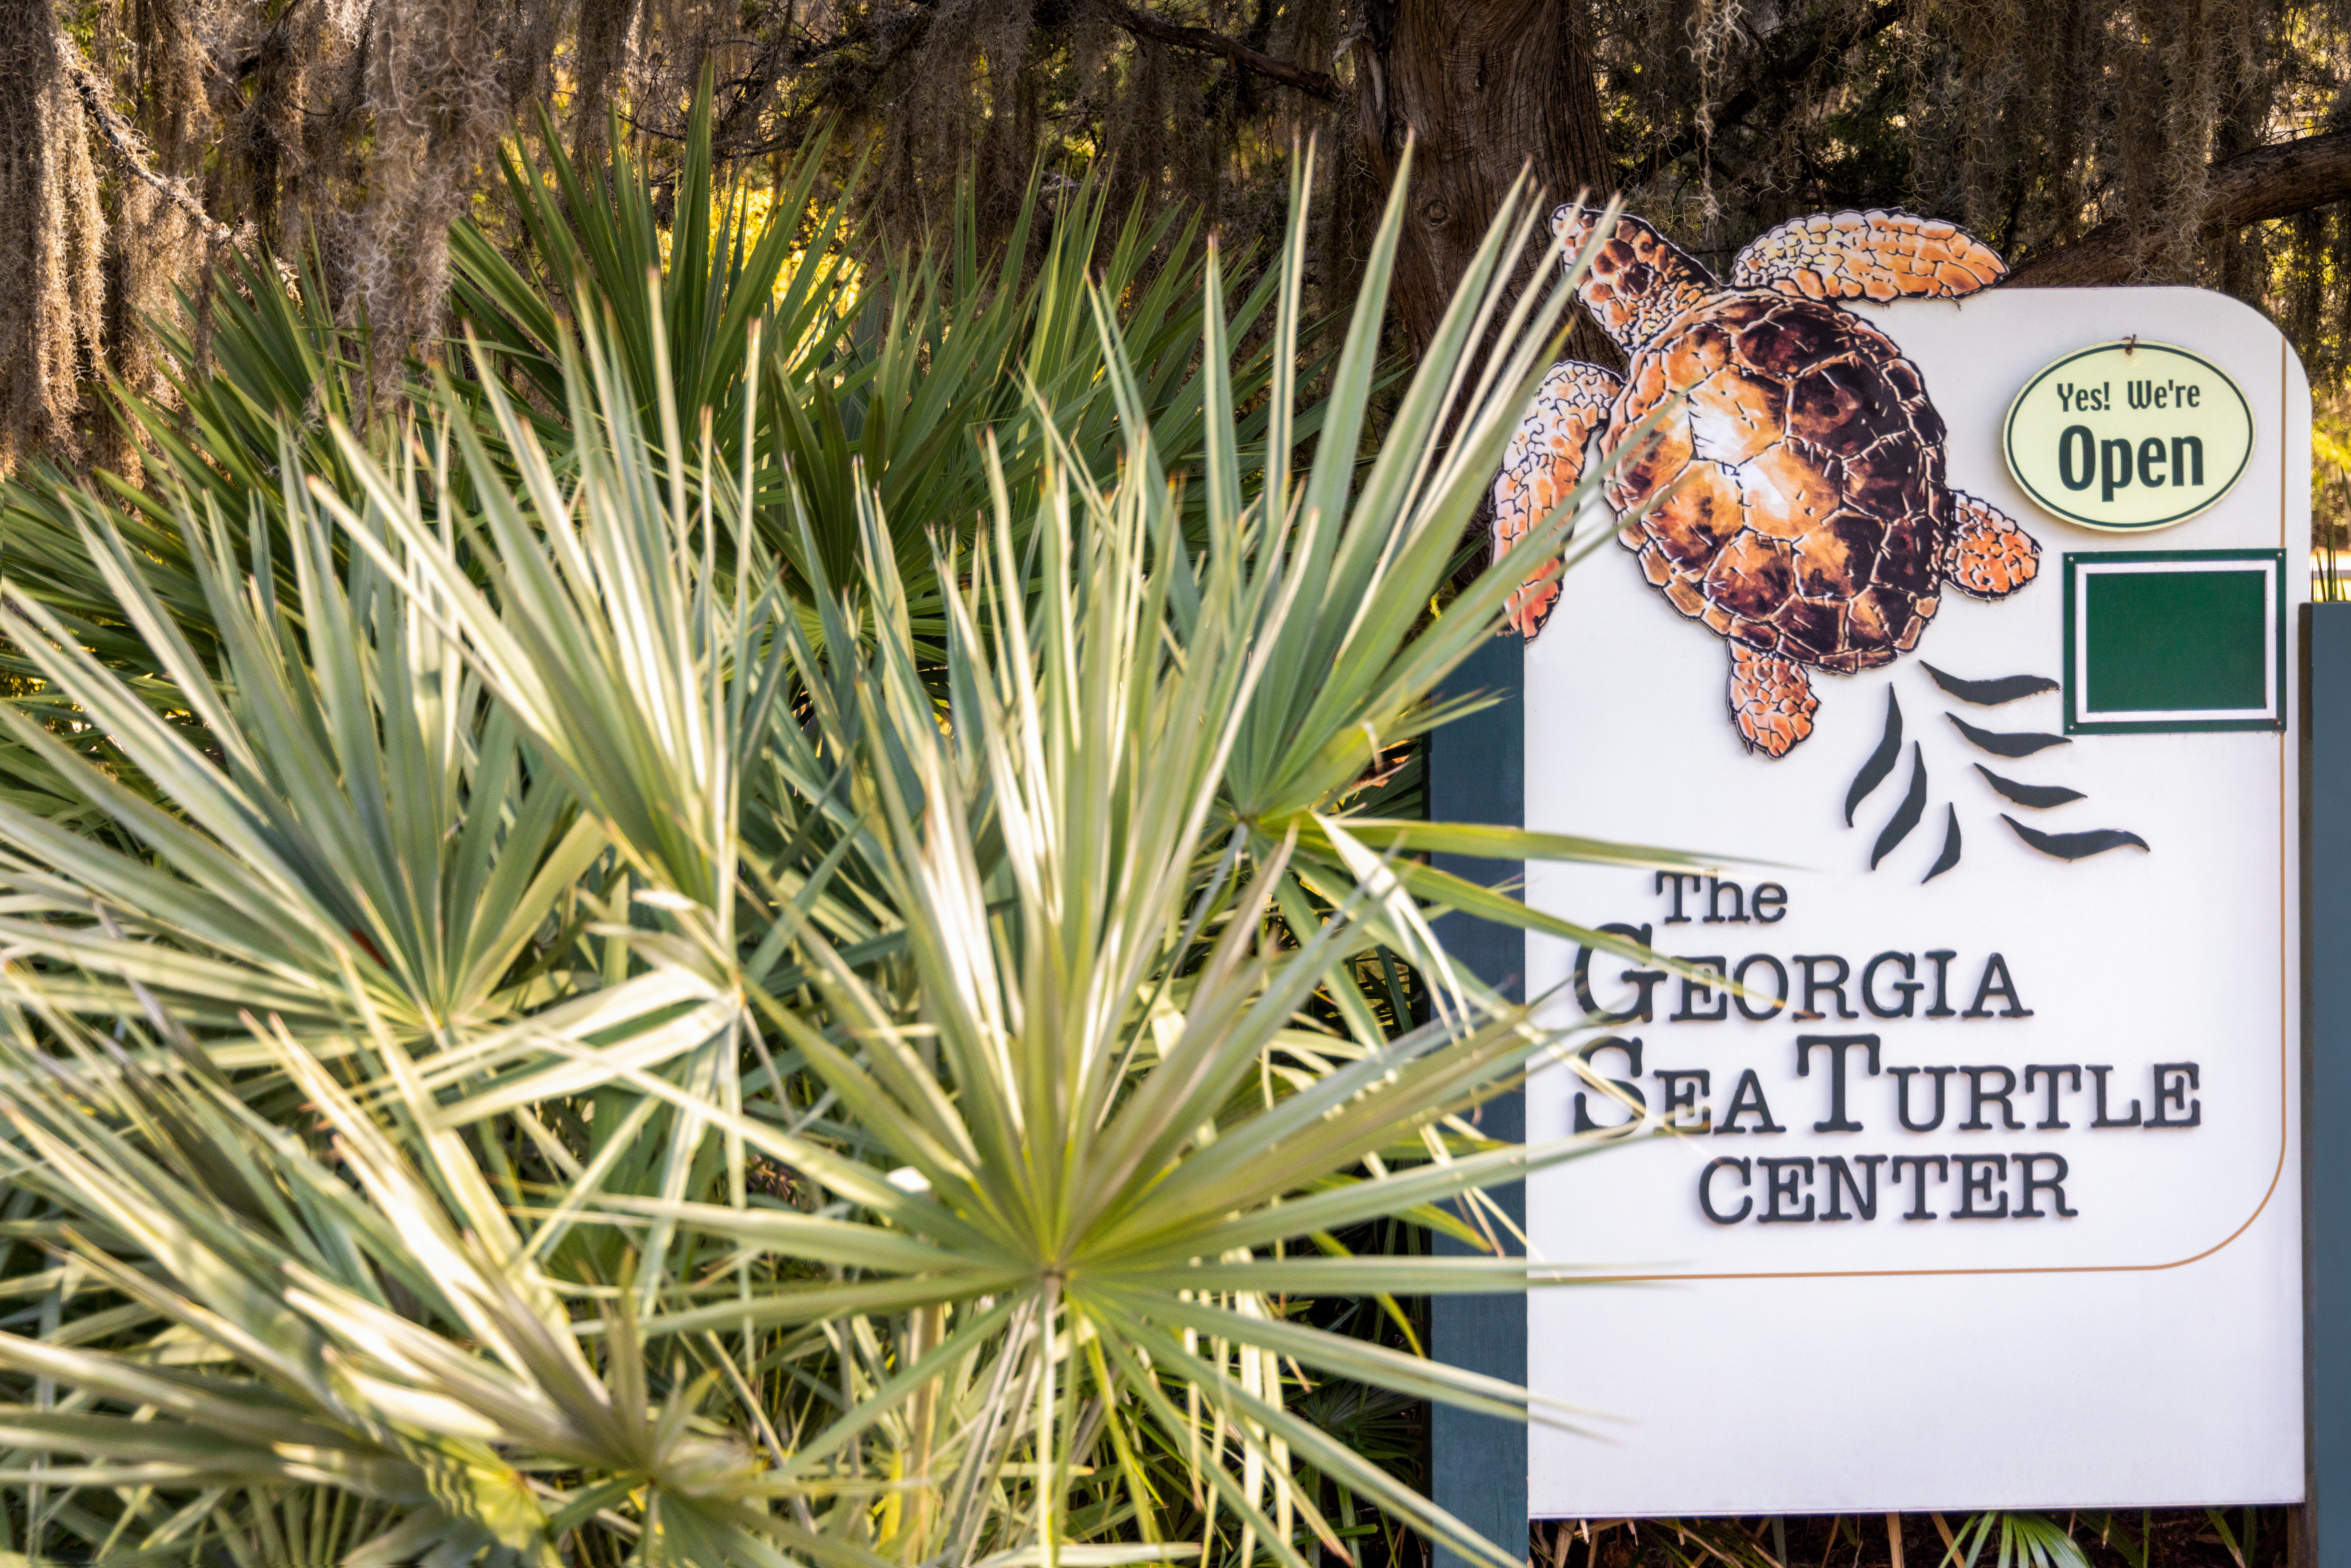 Visit the Georgia Sea Turtle Center while staying on the island